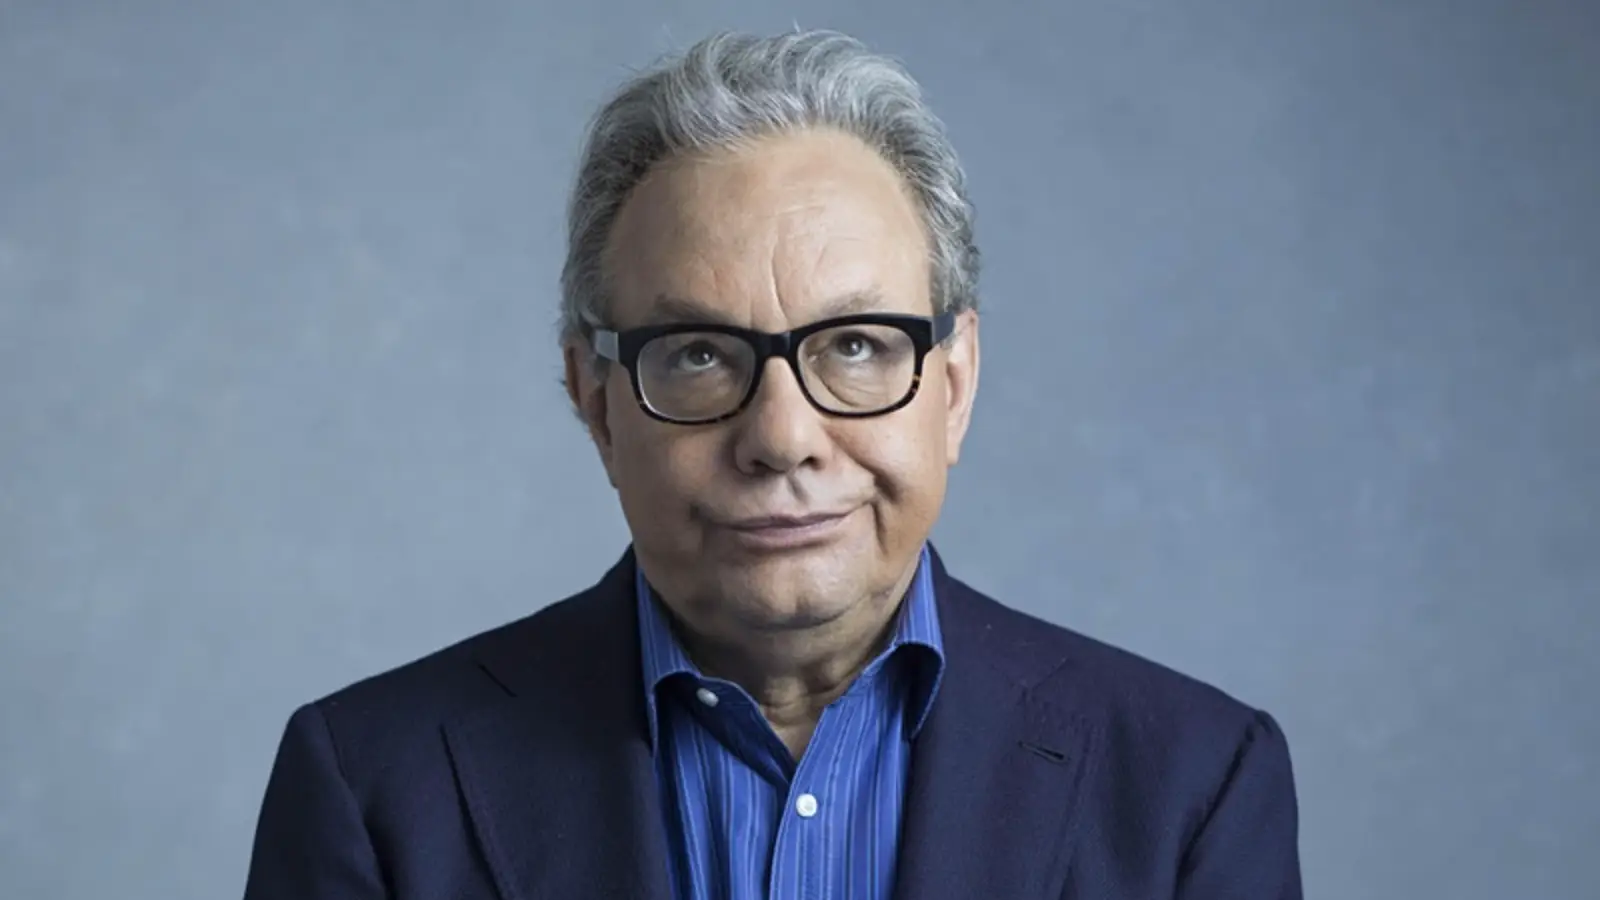 Headshot of Lewis Black, coming to Golden State Theatre on MOnterey Peninsula in California.